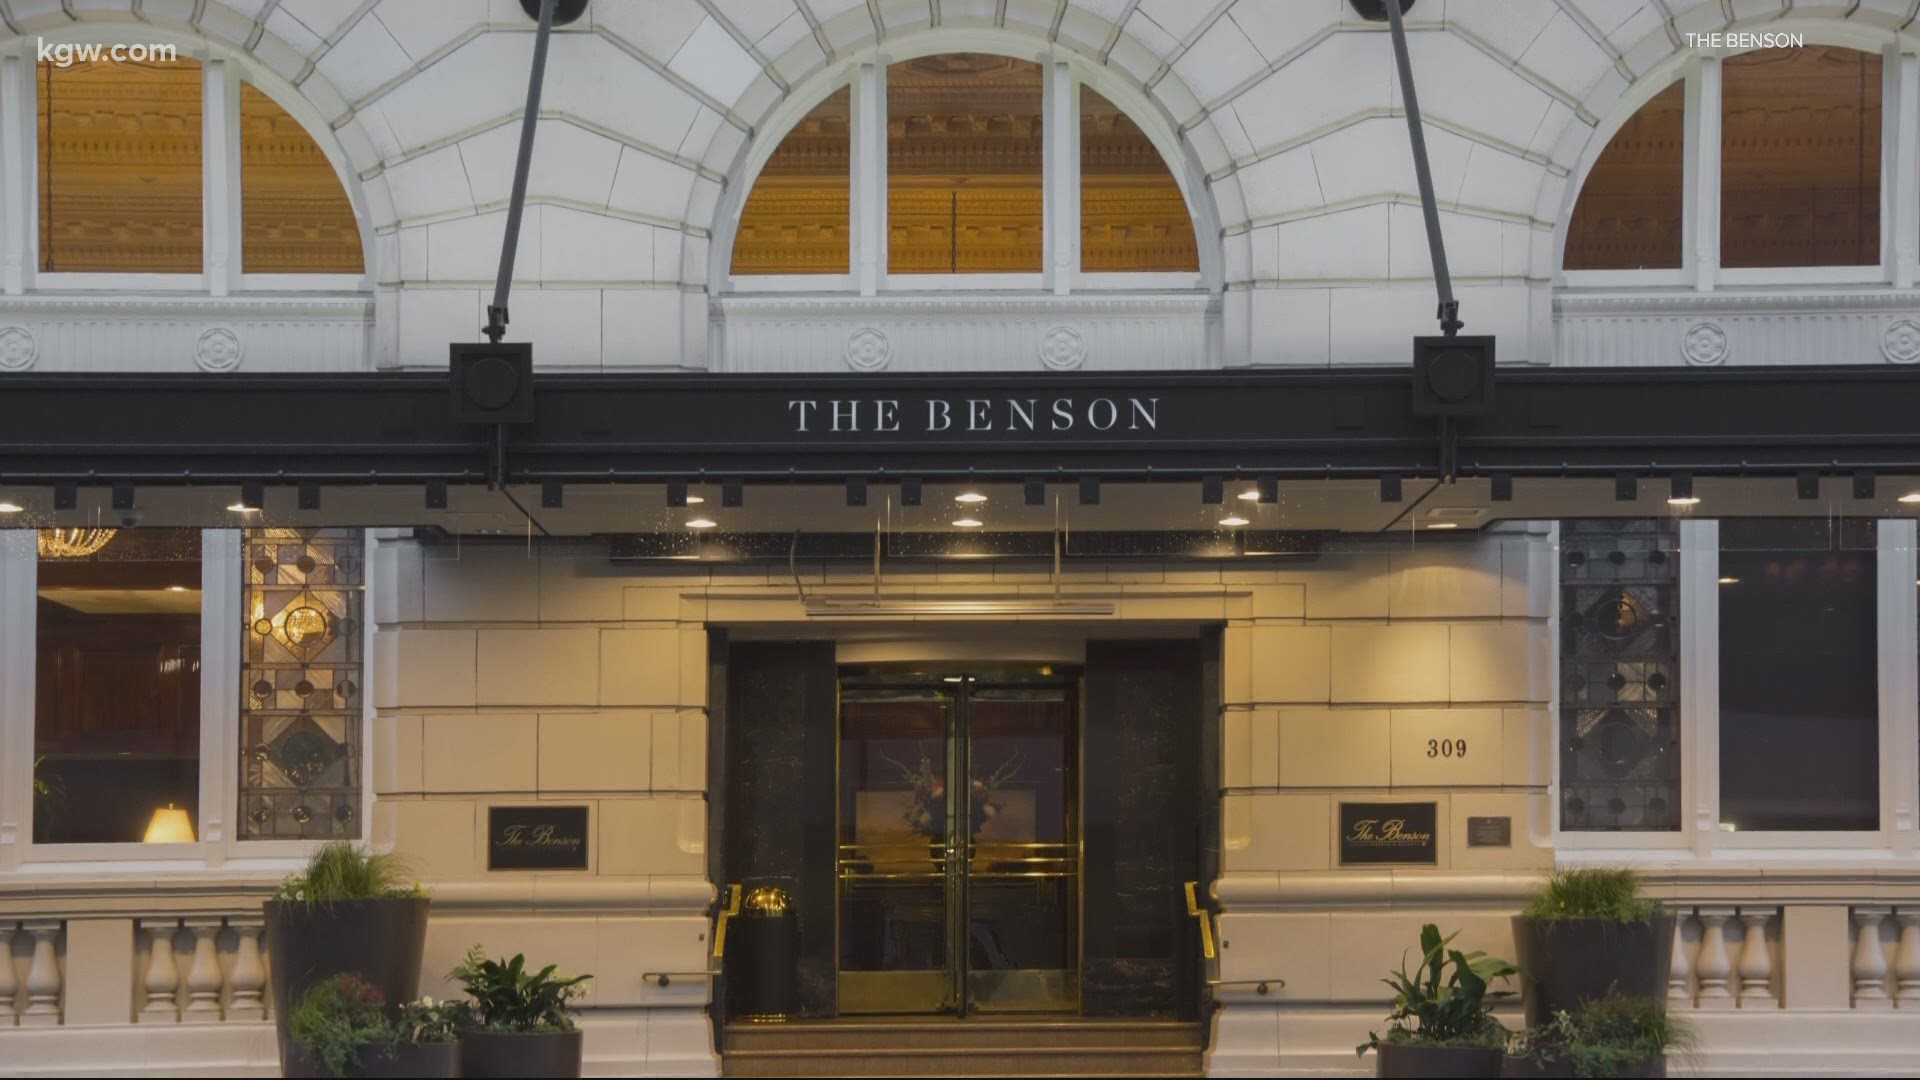 A historic downtown Portland hotel is closing temporarily. The Benson has been open since 1913. As Jon Goodwin reports, leadership hopes a six-week closure will help